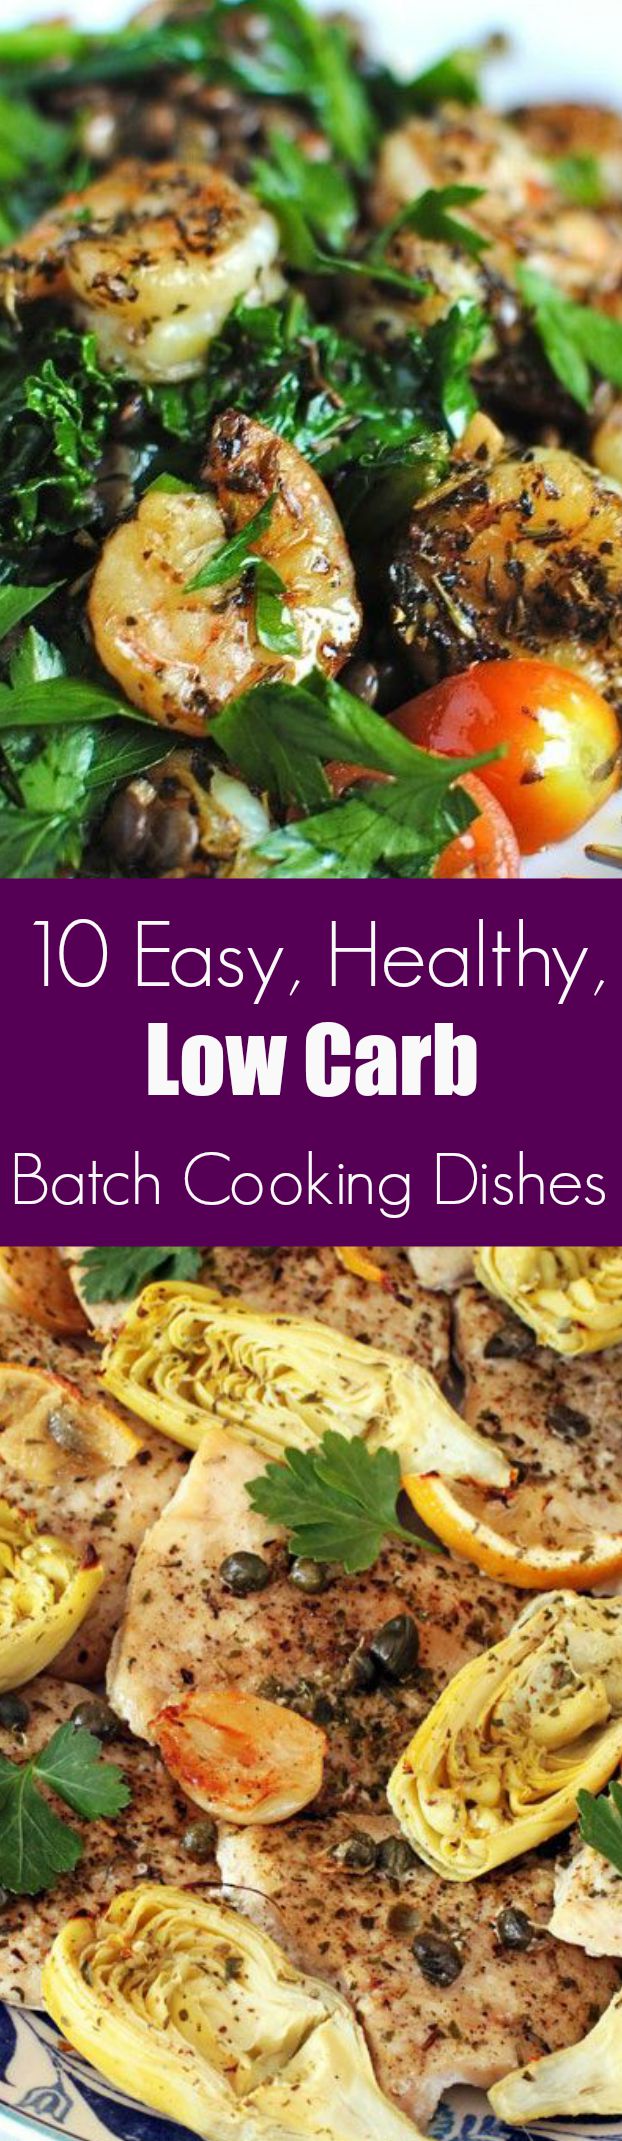 BATCH COOKING DISHES FOR YOUR LOW CARB DIET | www.4hourbodygirl.com